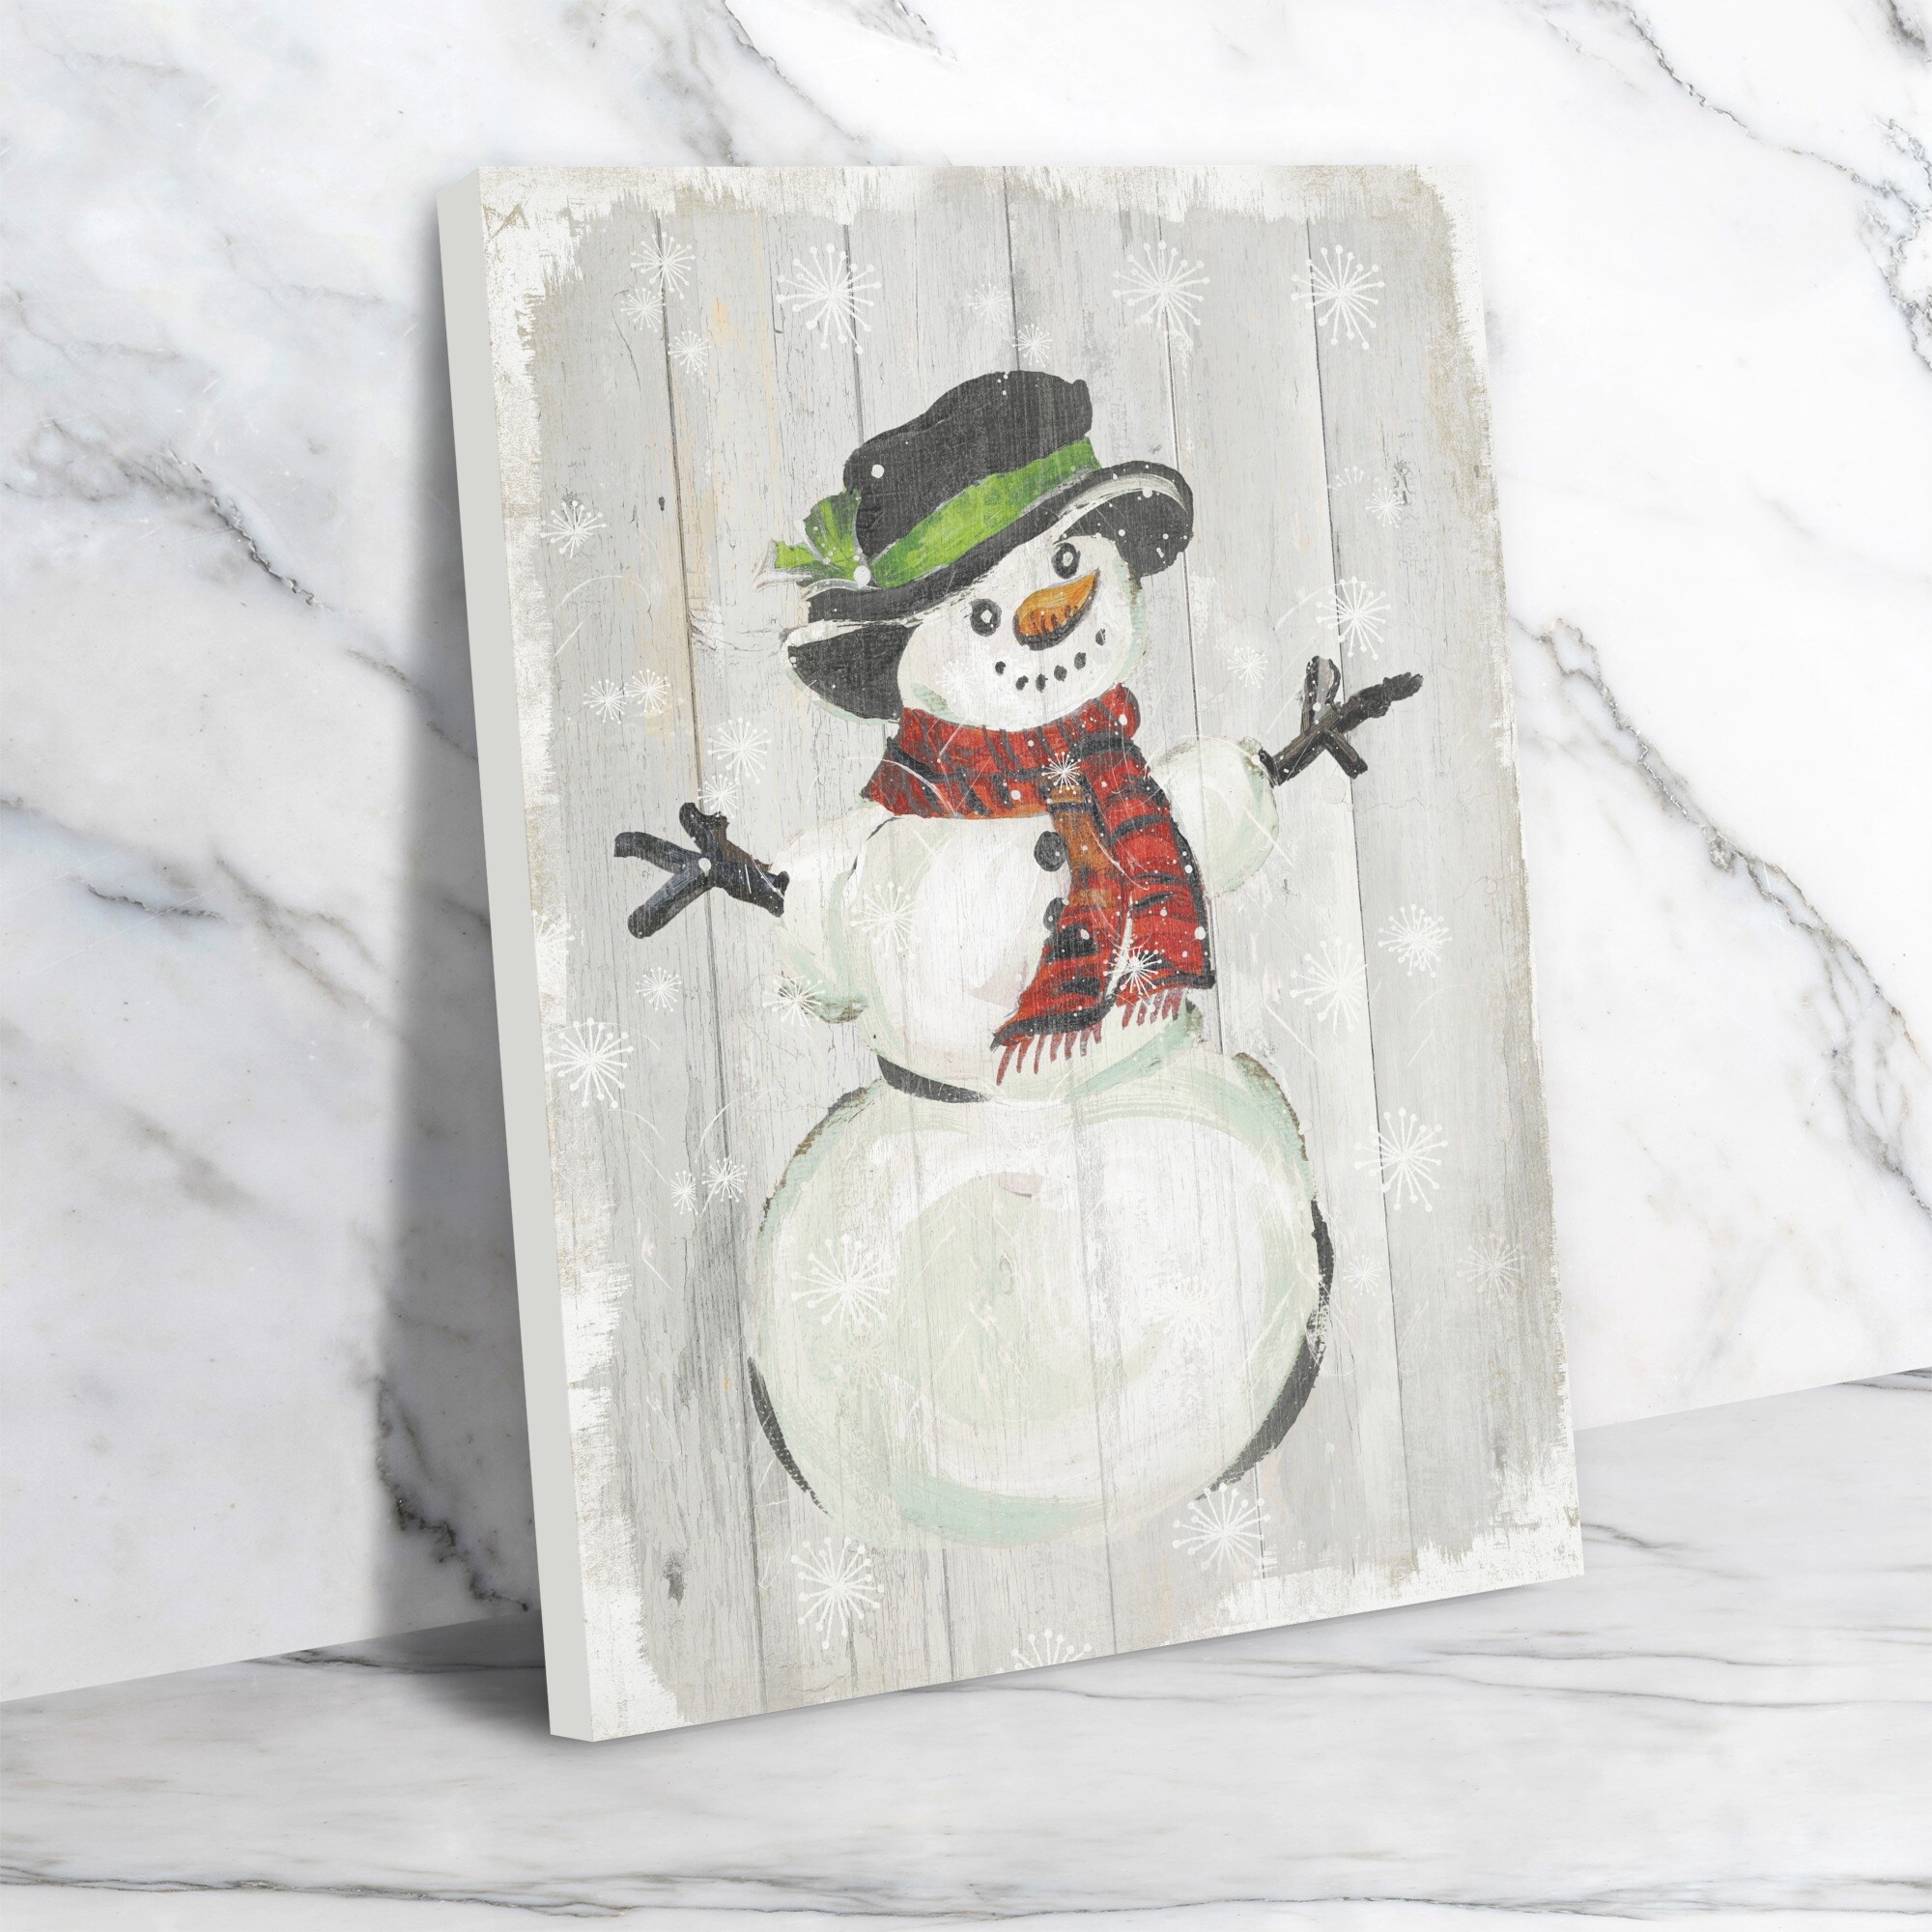 https://ak1.ostkcdn.com/images/products/is/images/direct/e038ed26c5ebfca4cde5c755666b3b6bd8ab5717/5%22-x-7%22-Holiday-Snowman-by-Pi-Holiday-Wrapped-Canvas-Wall-Art---Americanflat.jpg